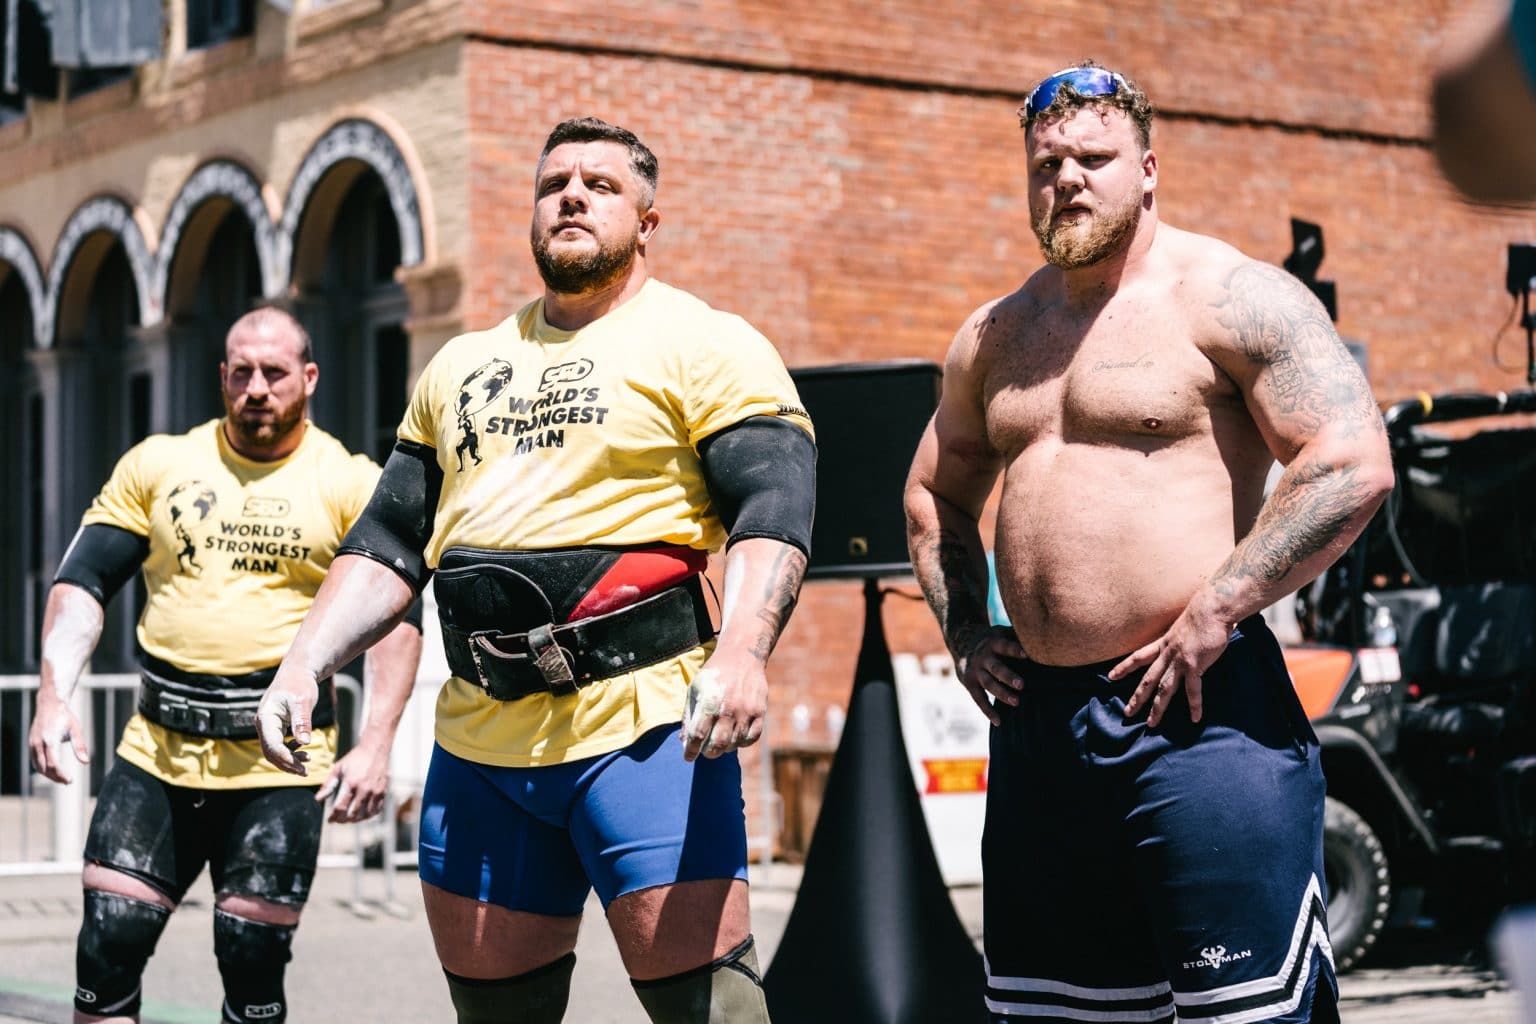 How To Watch The 2021 World's Strongest Man In The United States